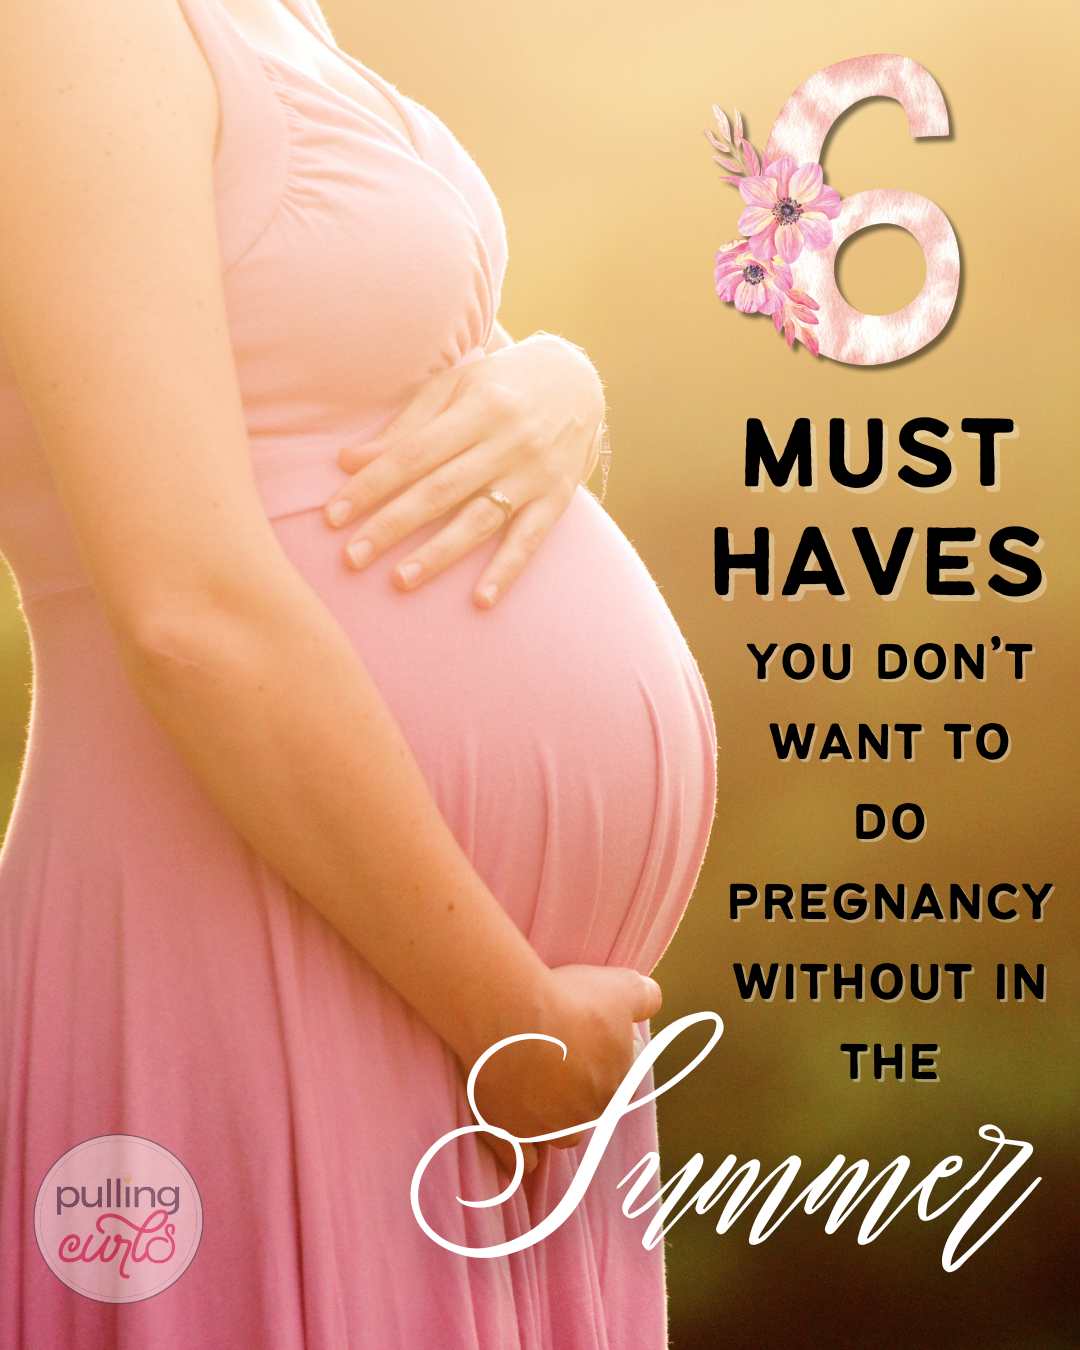 Are you pregnant this summer? Get ready to beat the heat with our essential survival guide. From hydration tips to the best swimwear, learn how to stay comfortable, healthy, and cool during your summer pregnancy. Bonus: Meet Hilary, The Pregnancy Nurse® with 20 years of experience! via @pullingcurls